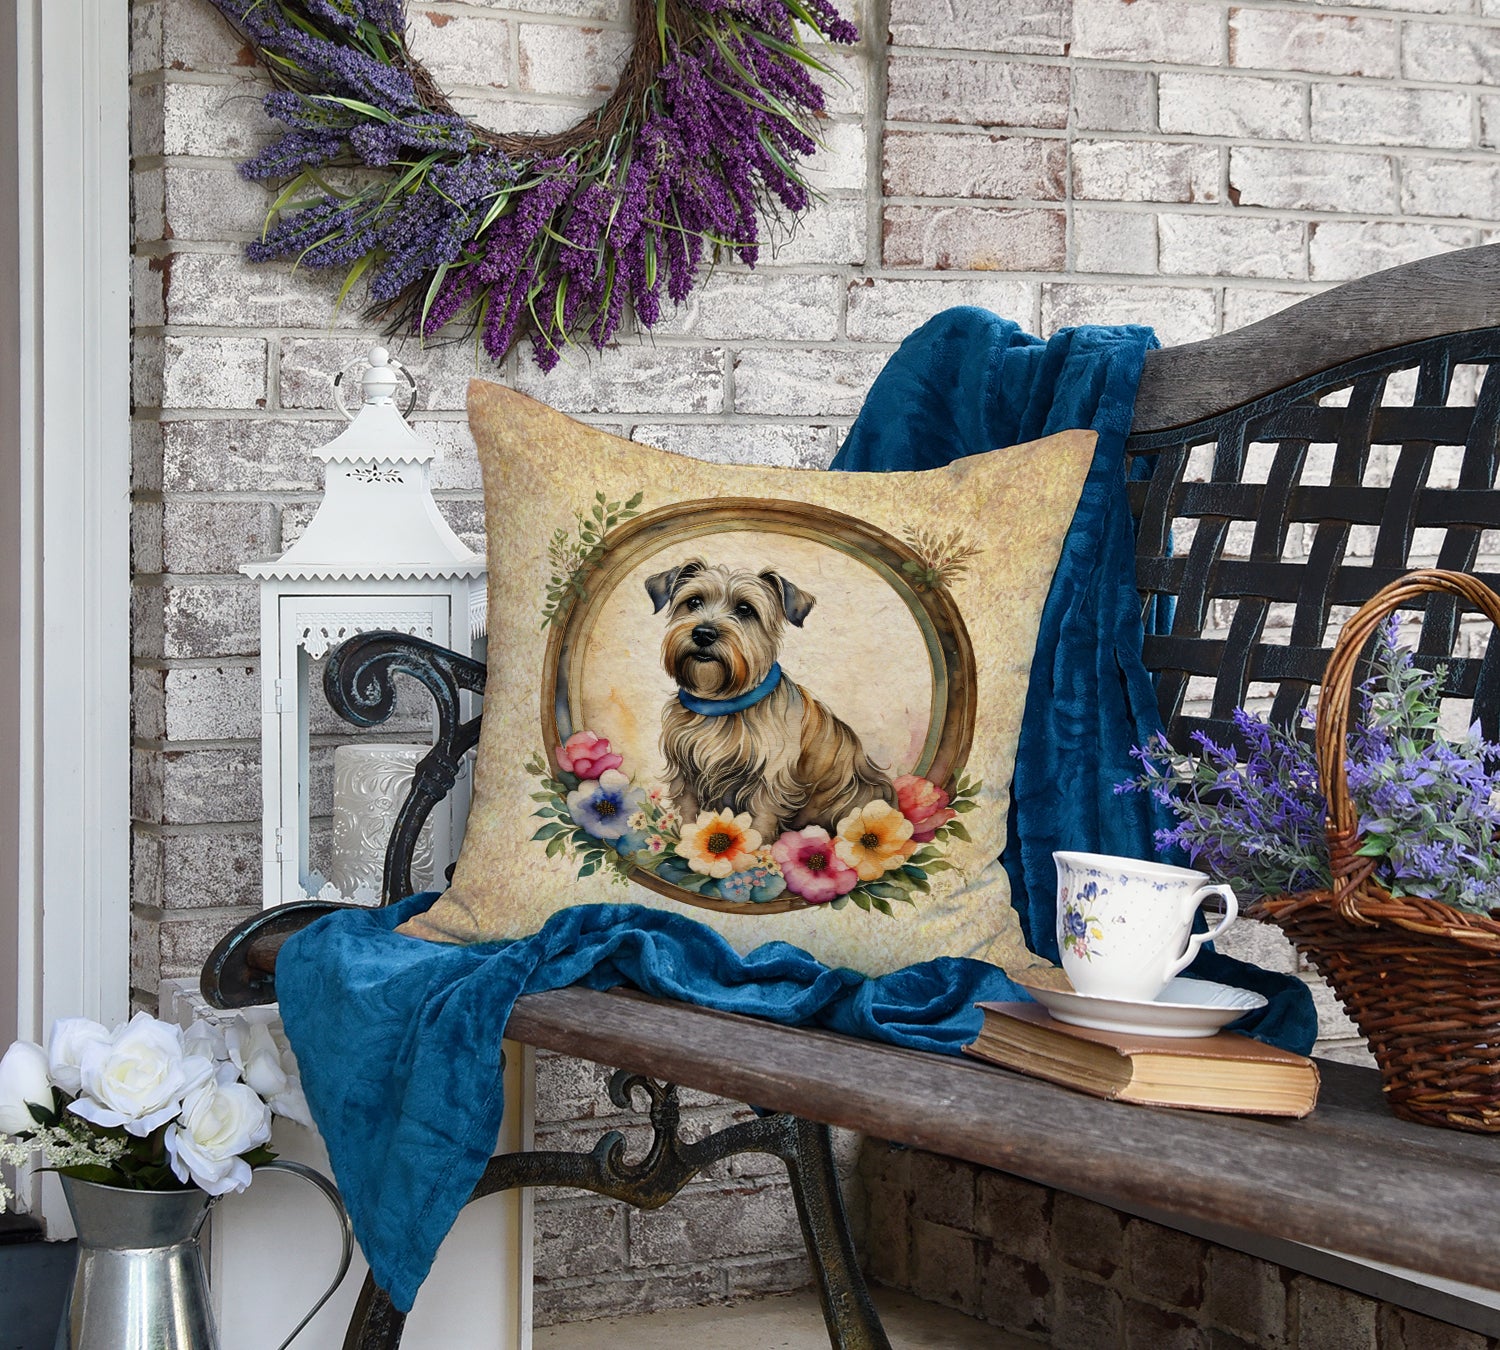 Glen of Imaal Terrier and Flowers Fabric Decorative Pillow